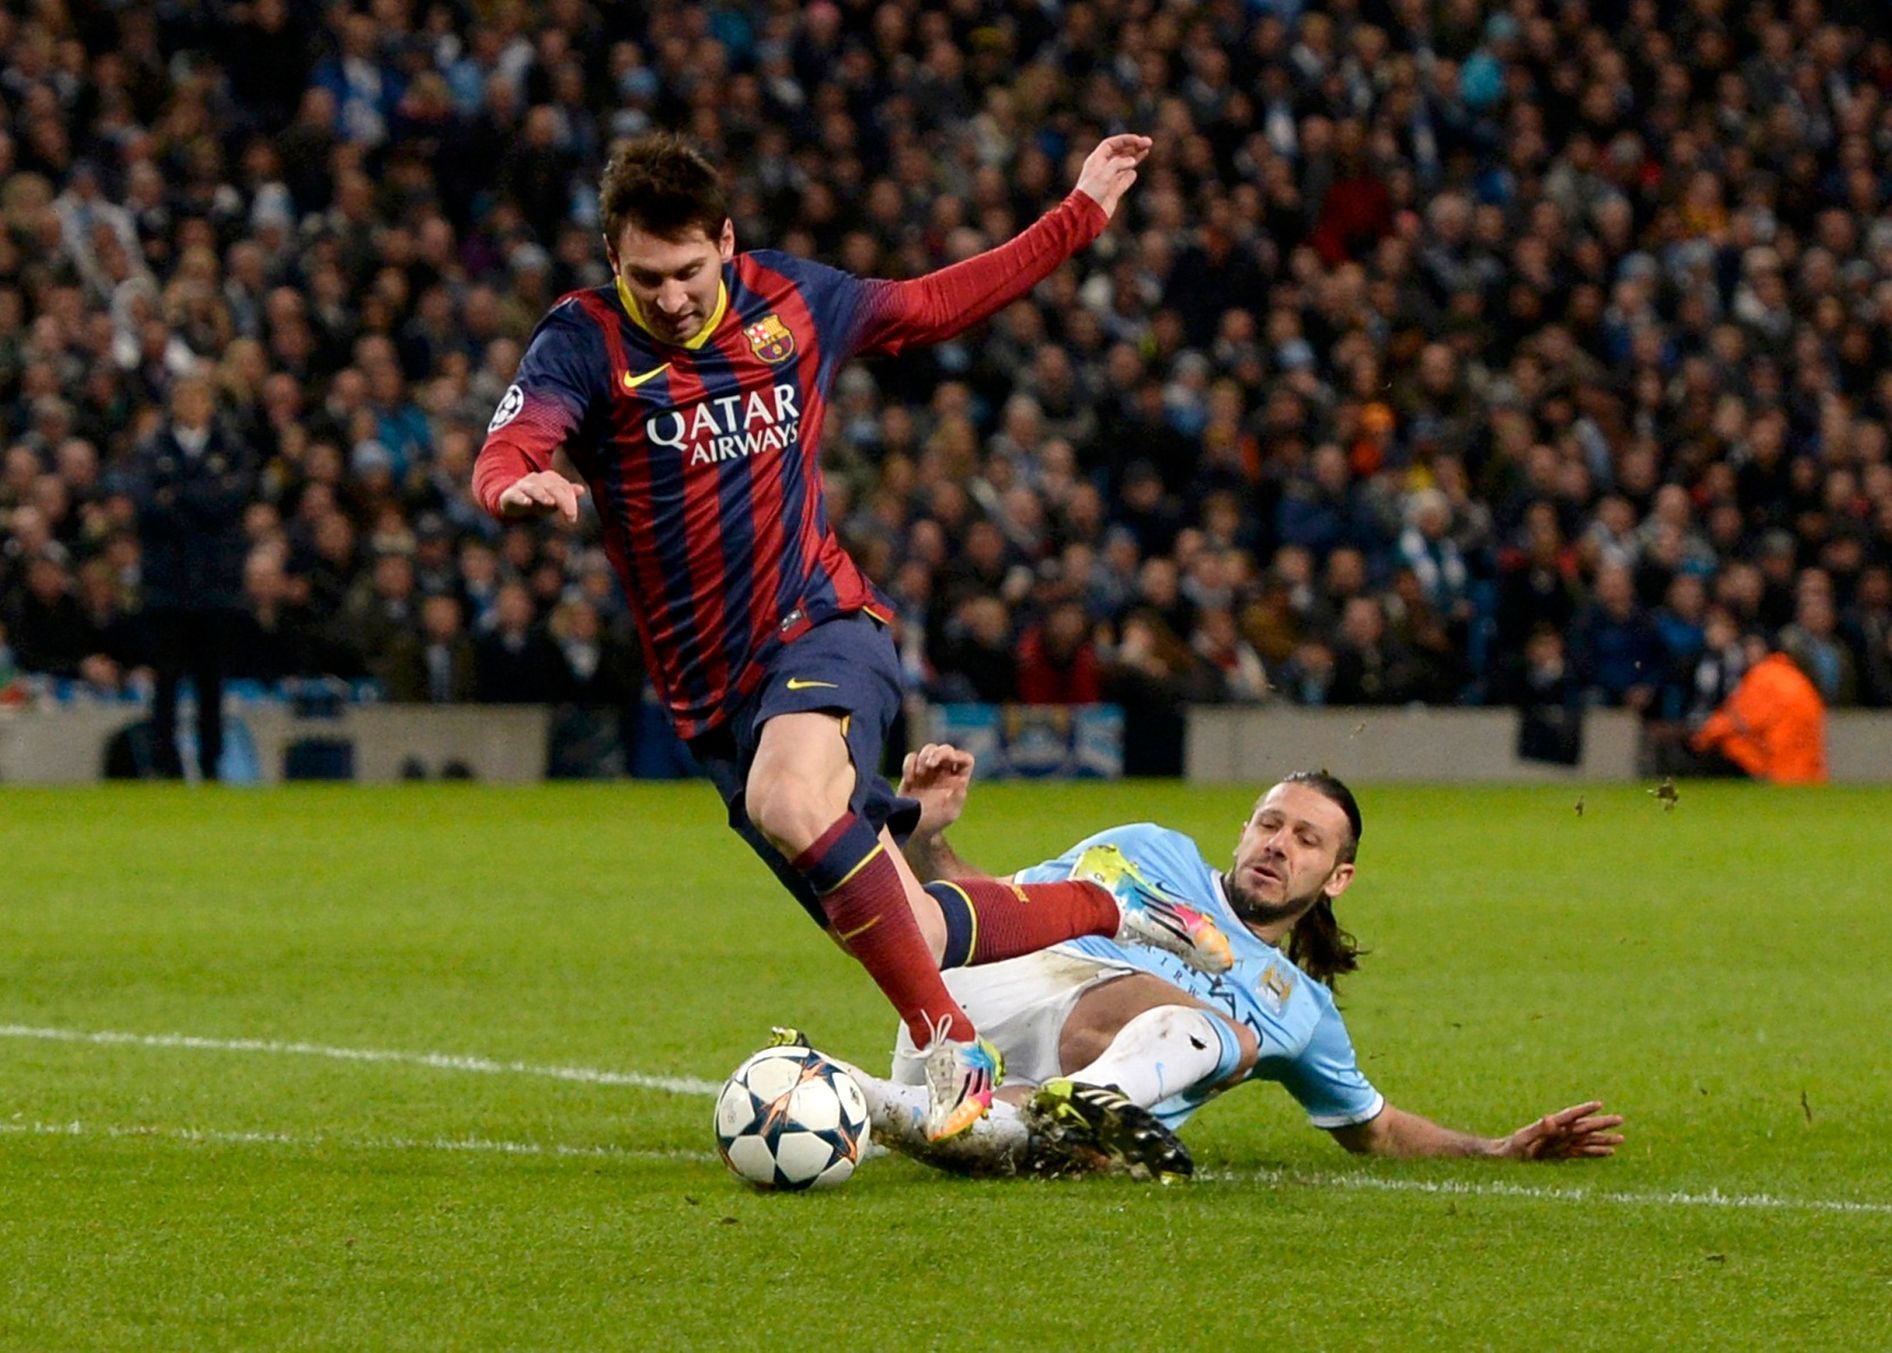 Manchester City's Martin Demichelis fouls Barcelona's Lionel Messi to concede a penalty during their Champions League round of 16 first leg soccer match at the Etihad Stadium in Manchester